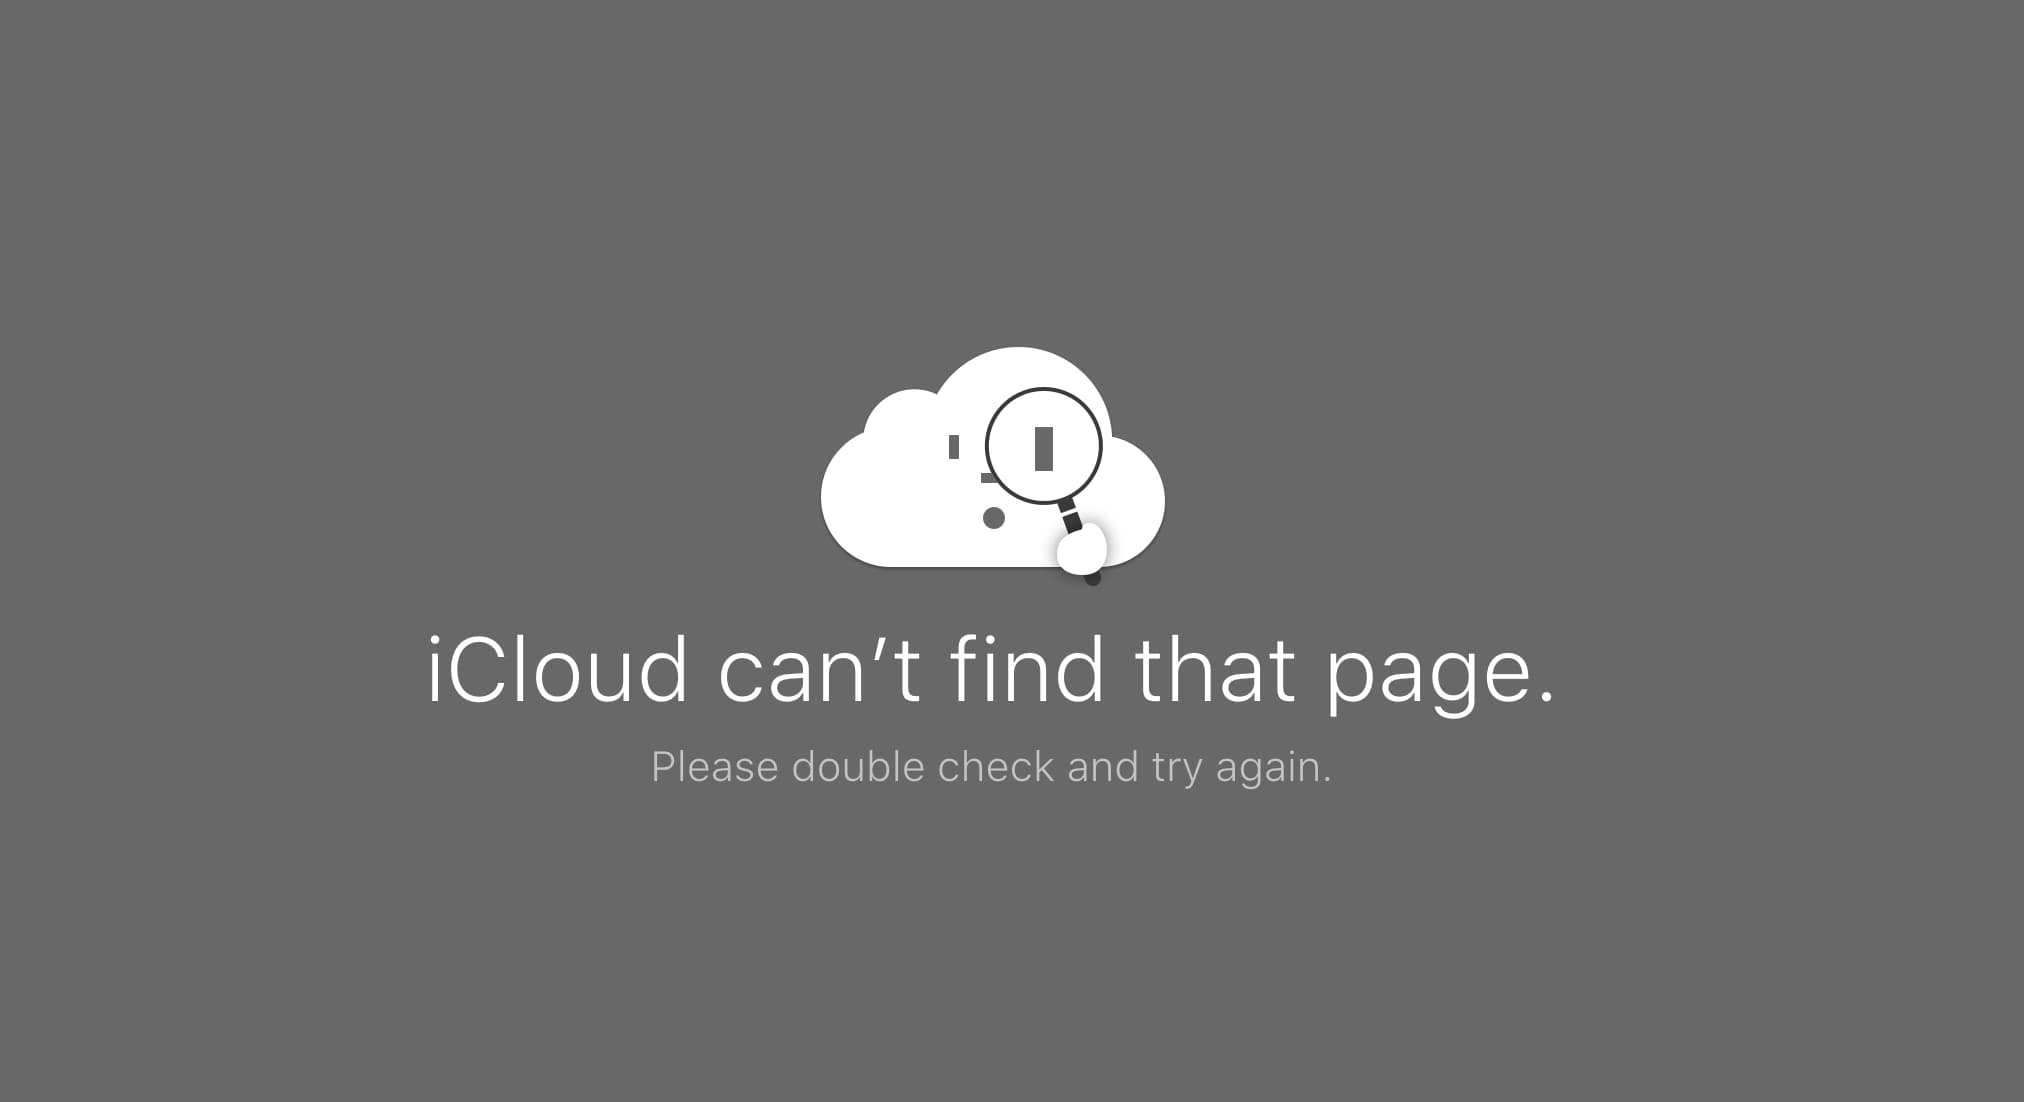 iCloud can't find that page error